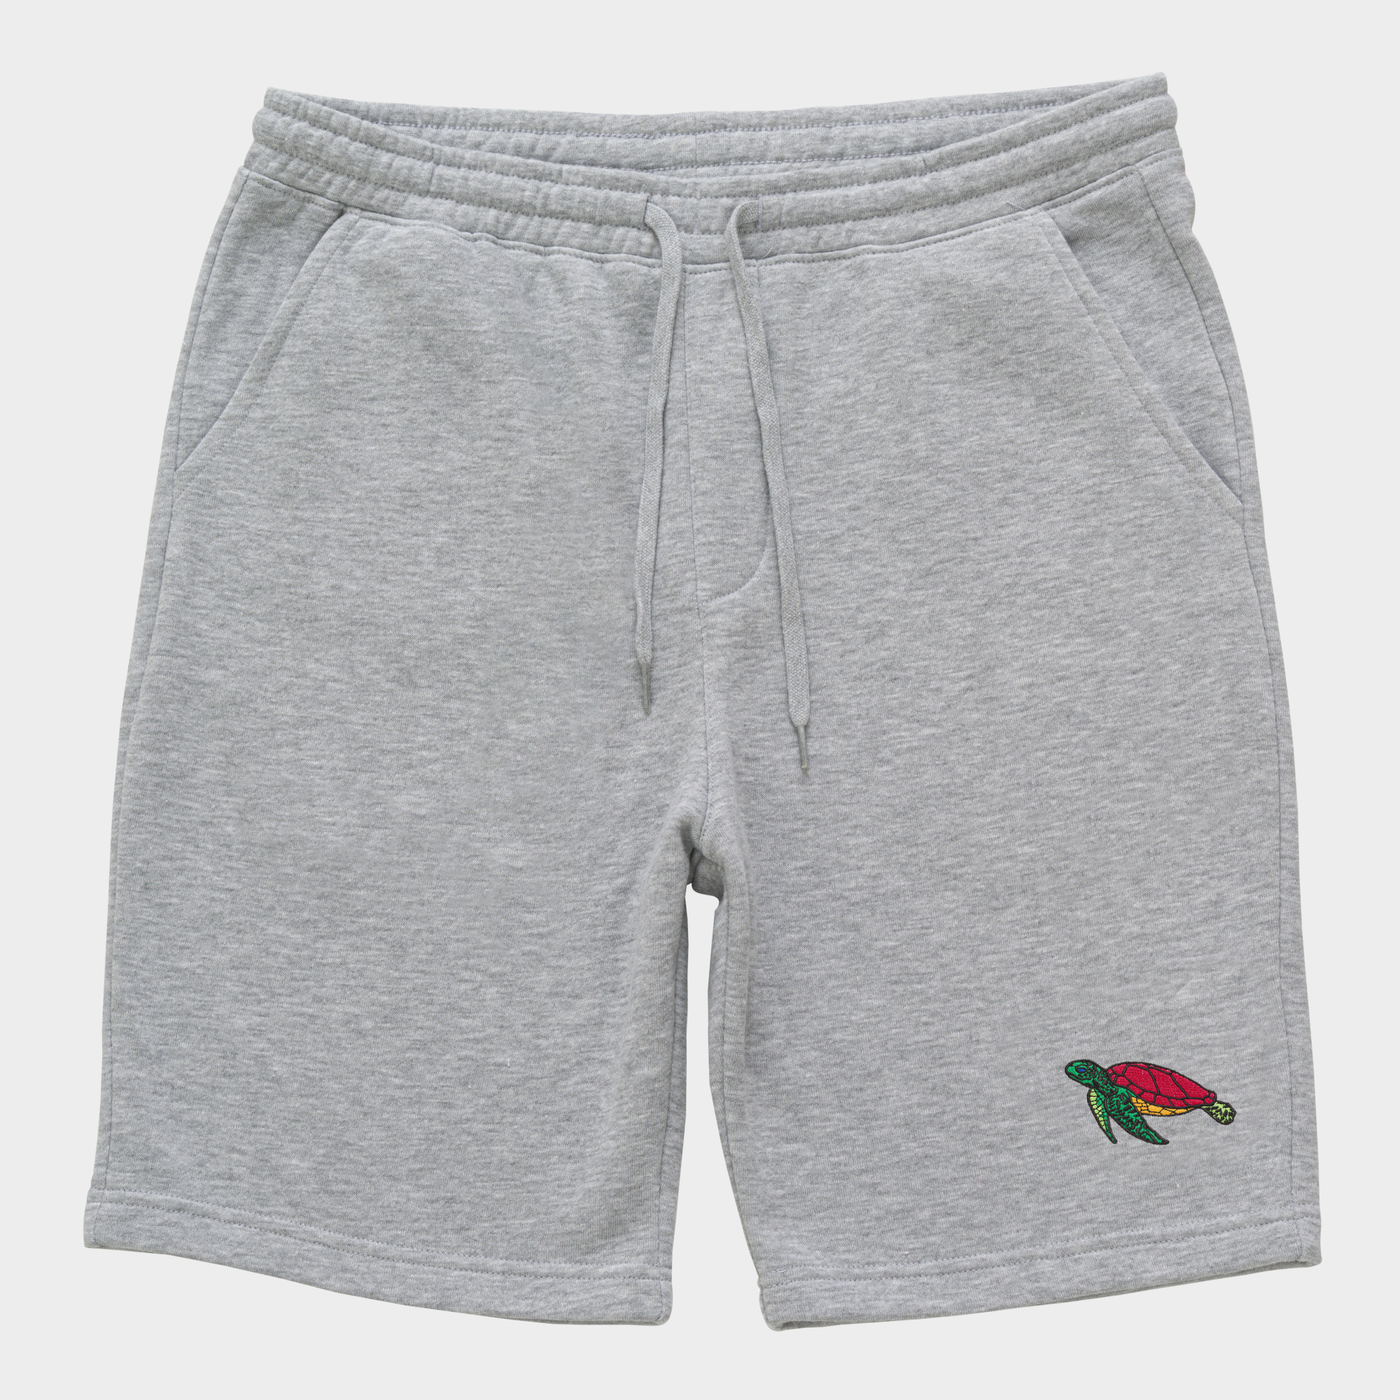 Bobby's Planet Men's Embroidered Sea Turtle Shorts from Seven Seas Fish Animals Collection in Heather Grey Color#color_heather-grey